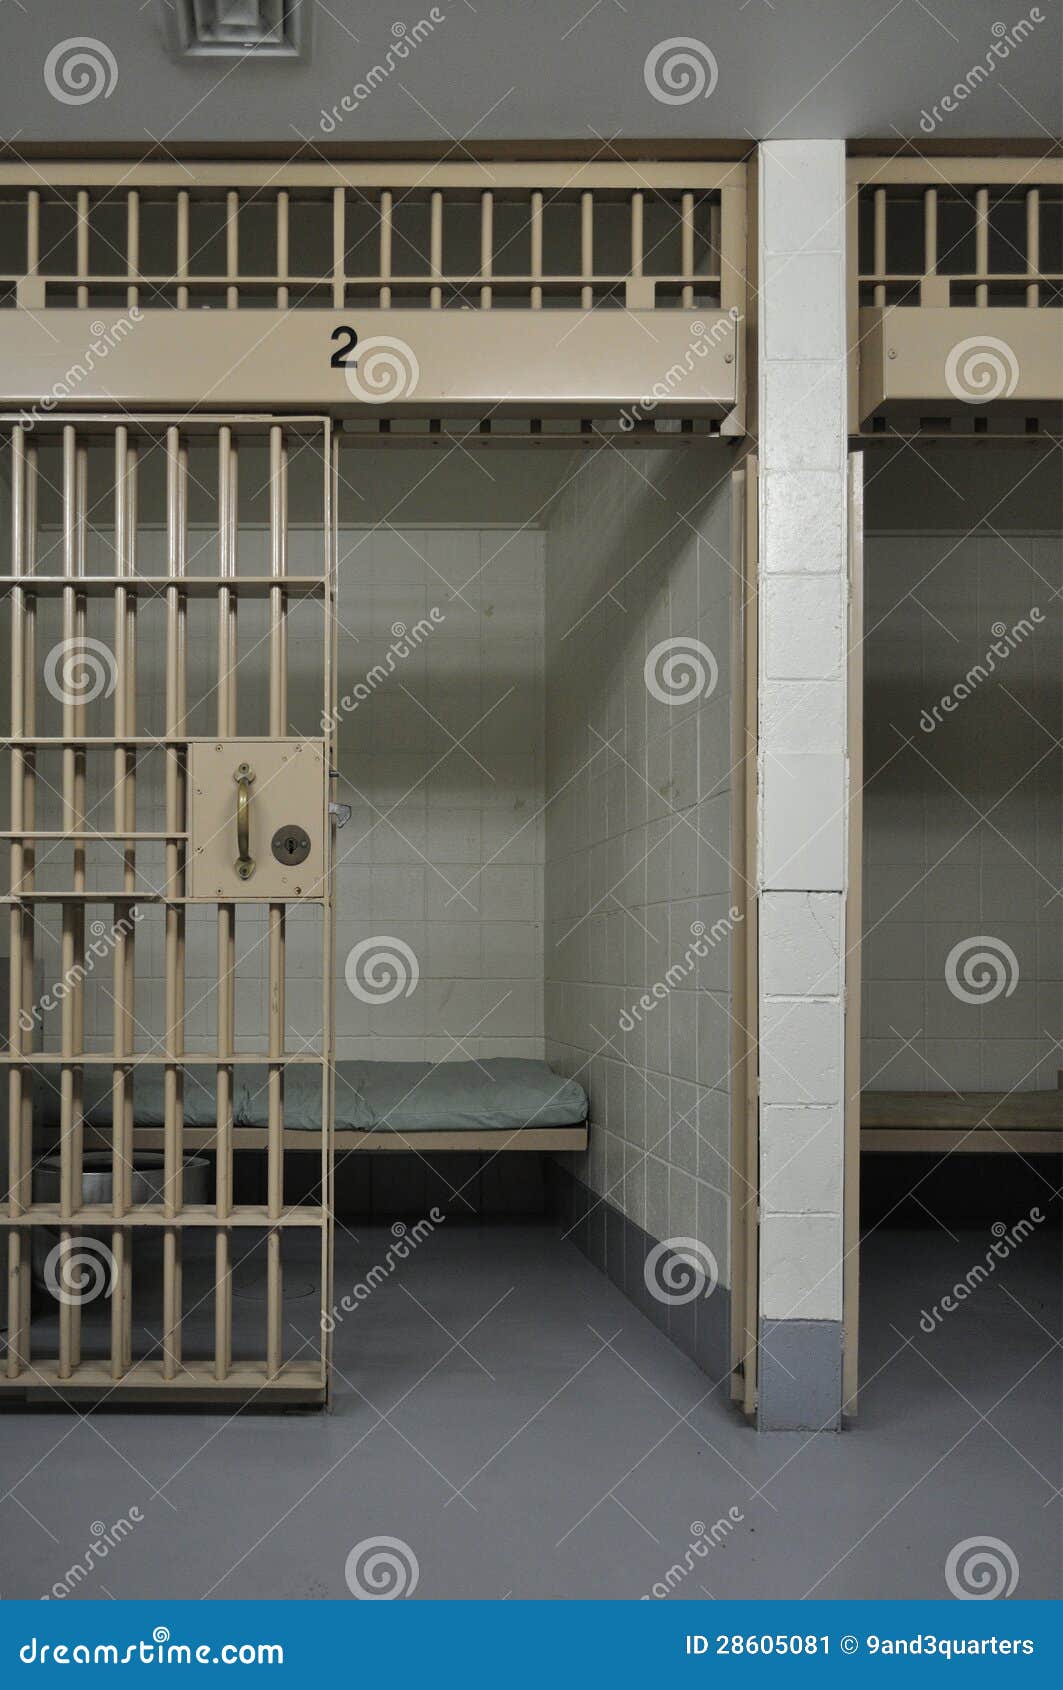 Jail cell in a small town stock image. Image of justice - 28605081